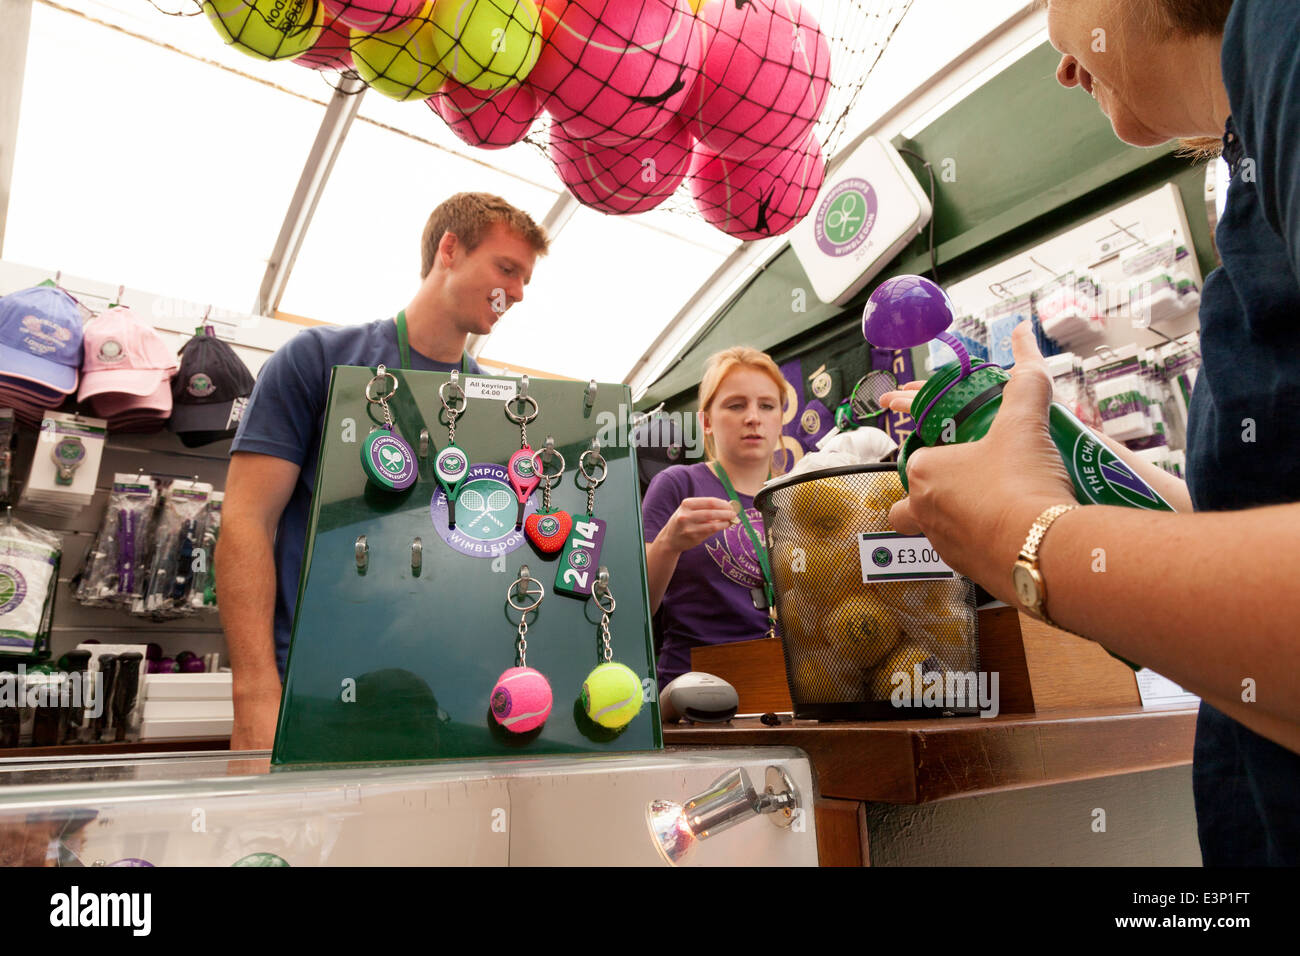 people shopping at a stall shop, Wimbledon All England Lawn Tennis Club, London SW19, England UK Stock Photo